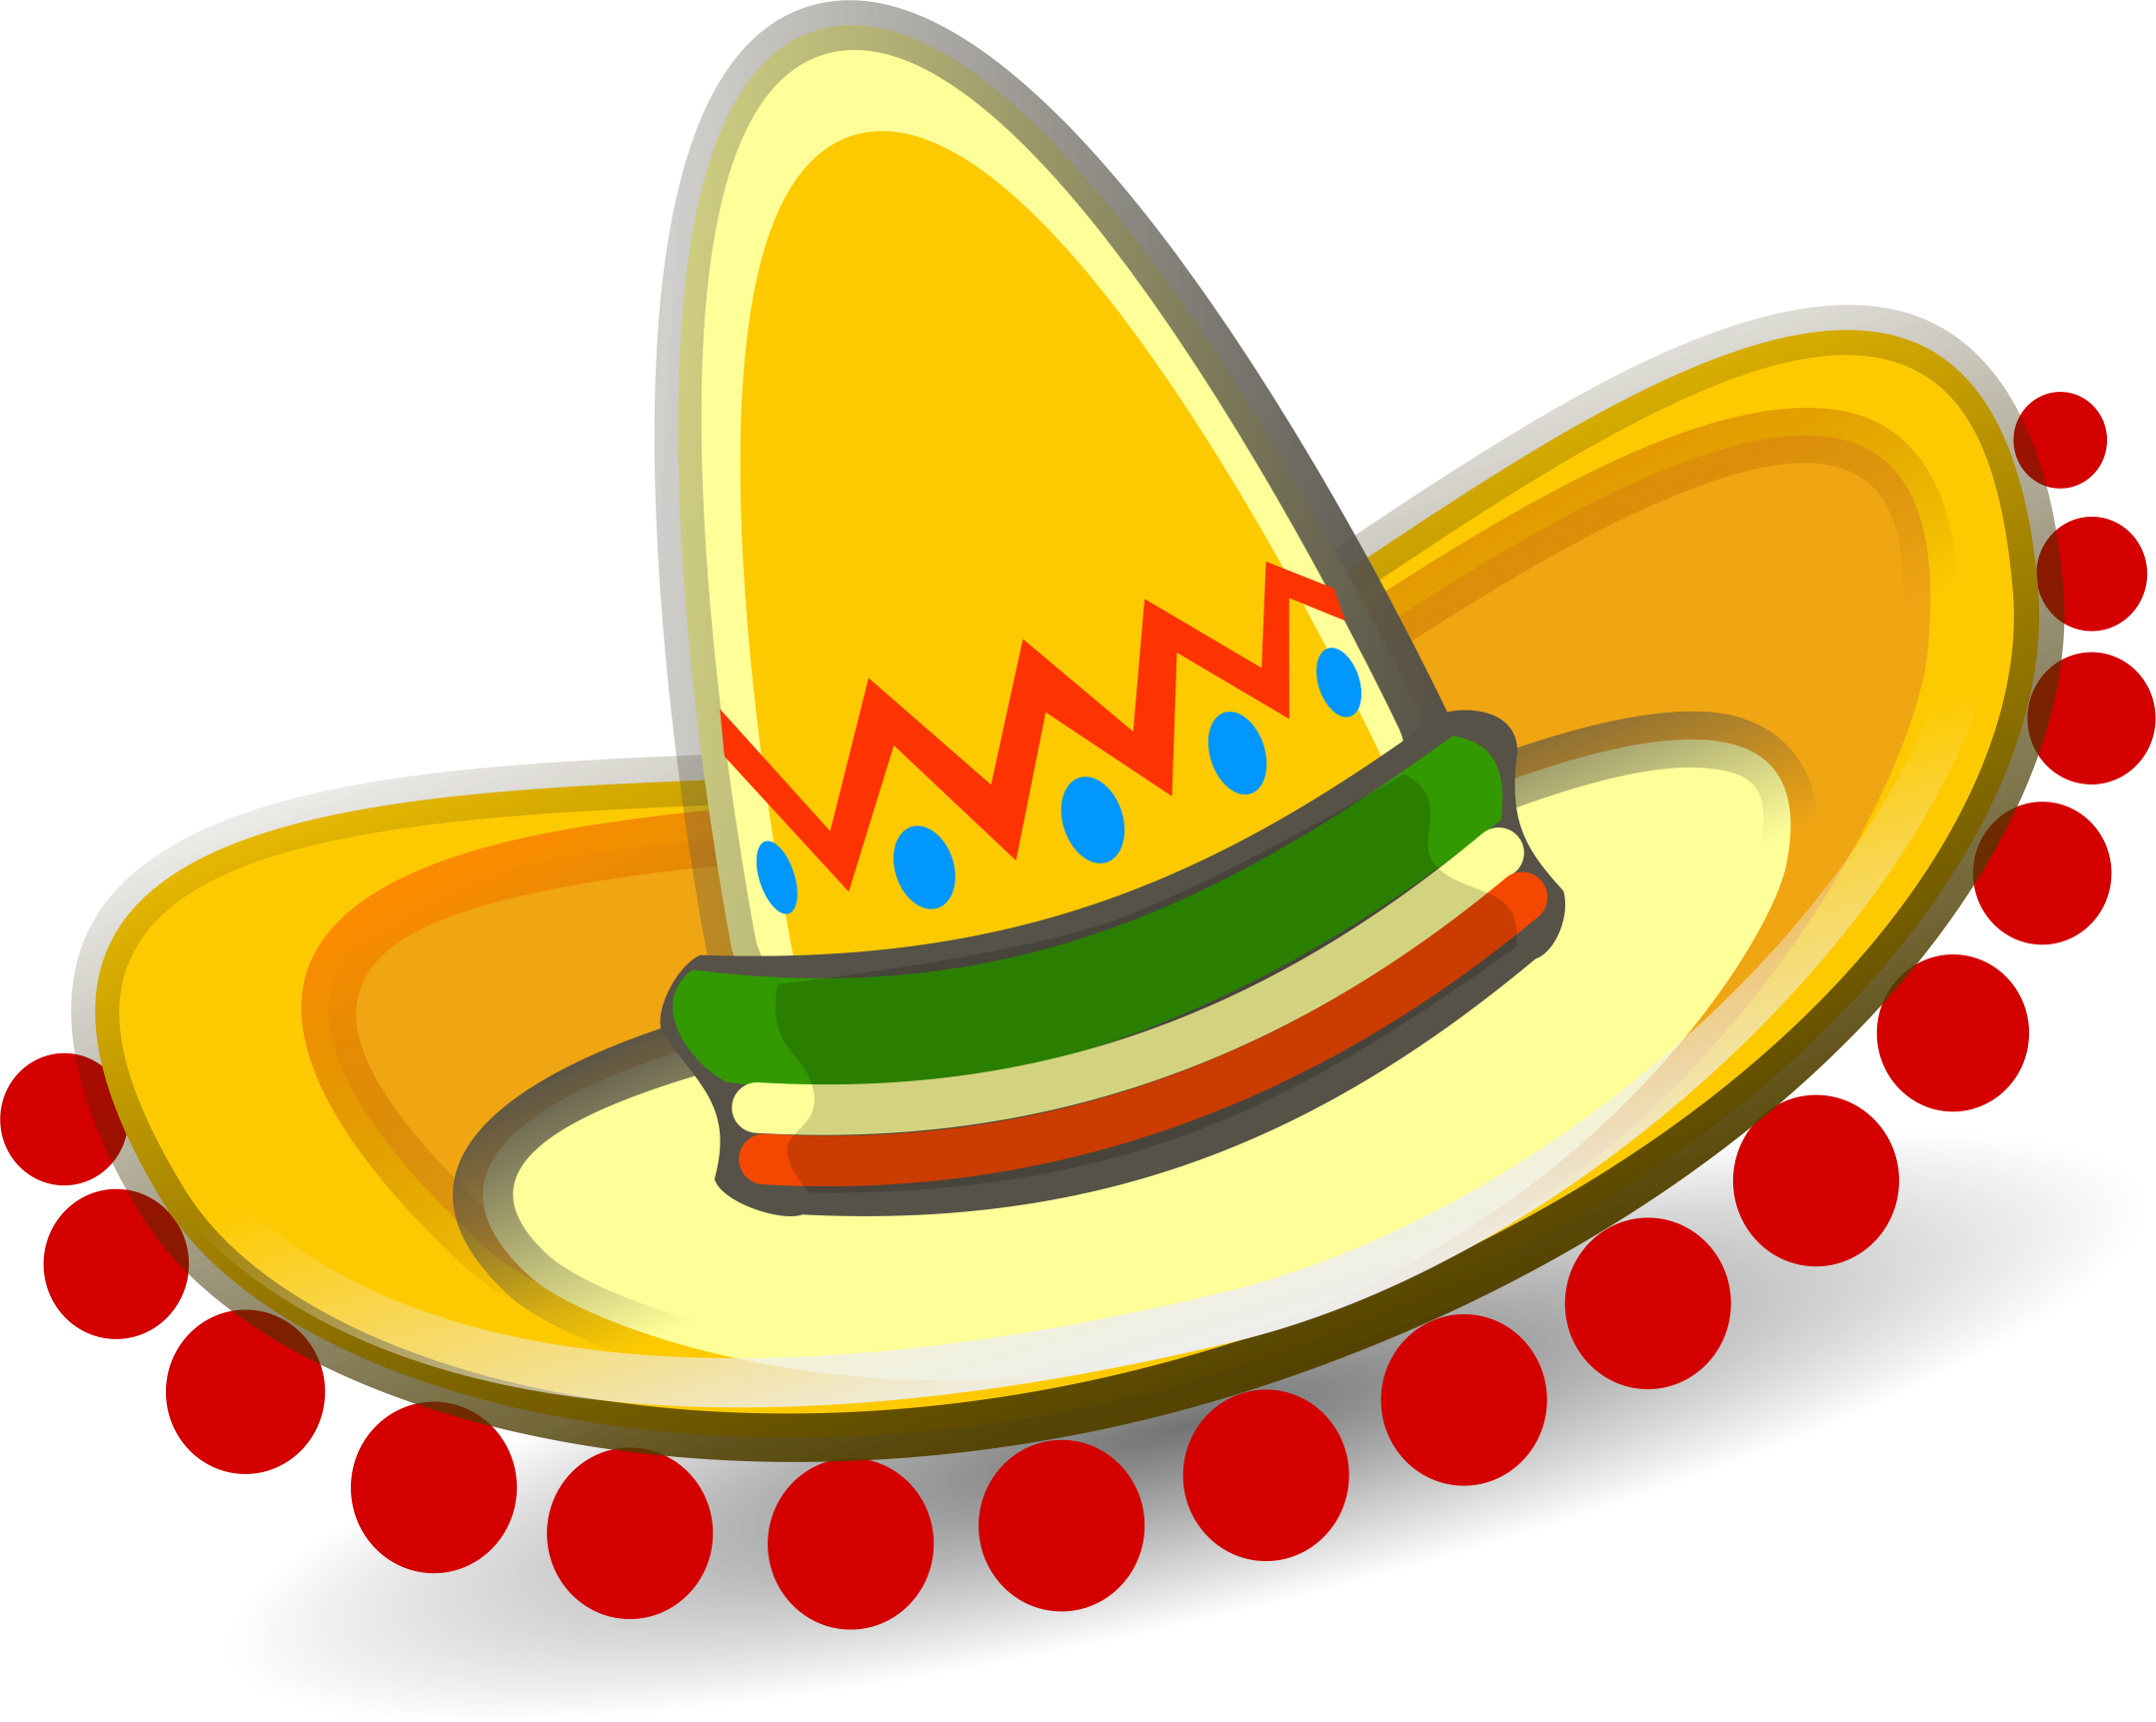 Mexico clipart fiesta. Pin by heather satterfield